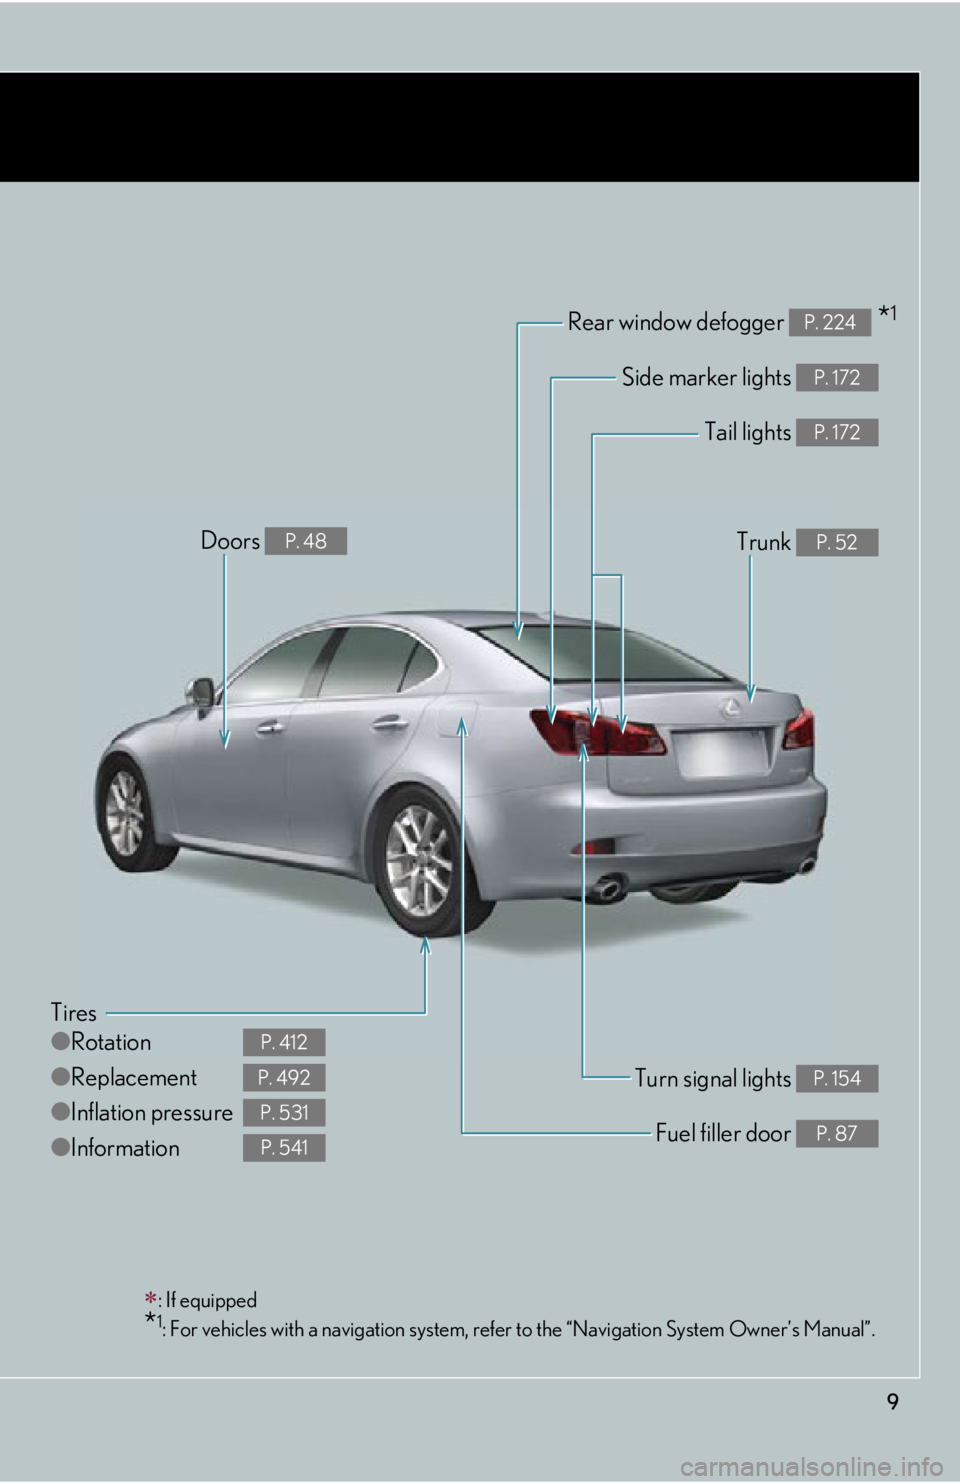 Lexus IS250 2012  Using the air conditioning system and defogger / LEXUS 2012 IS250,IS350 OWNERS MANUAL (OM53A87U) 9
Tires
●Rotation
● Replacement
● Inflation pressure
● Information
P. 412
P. 492
P. 531
P. 541
Tail lights P. 172
Side marker lights P. 172
Trunk P. 52
Rear window defogger  *1P. 224
Doors P. 